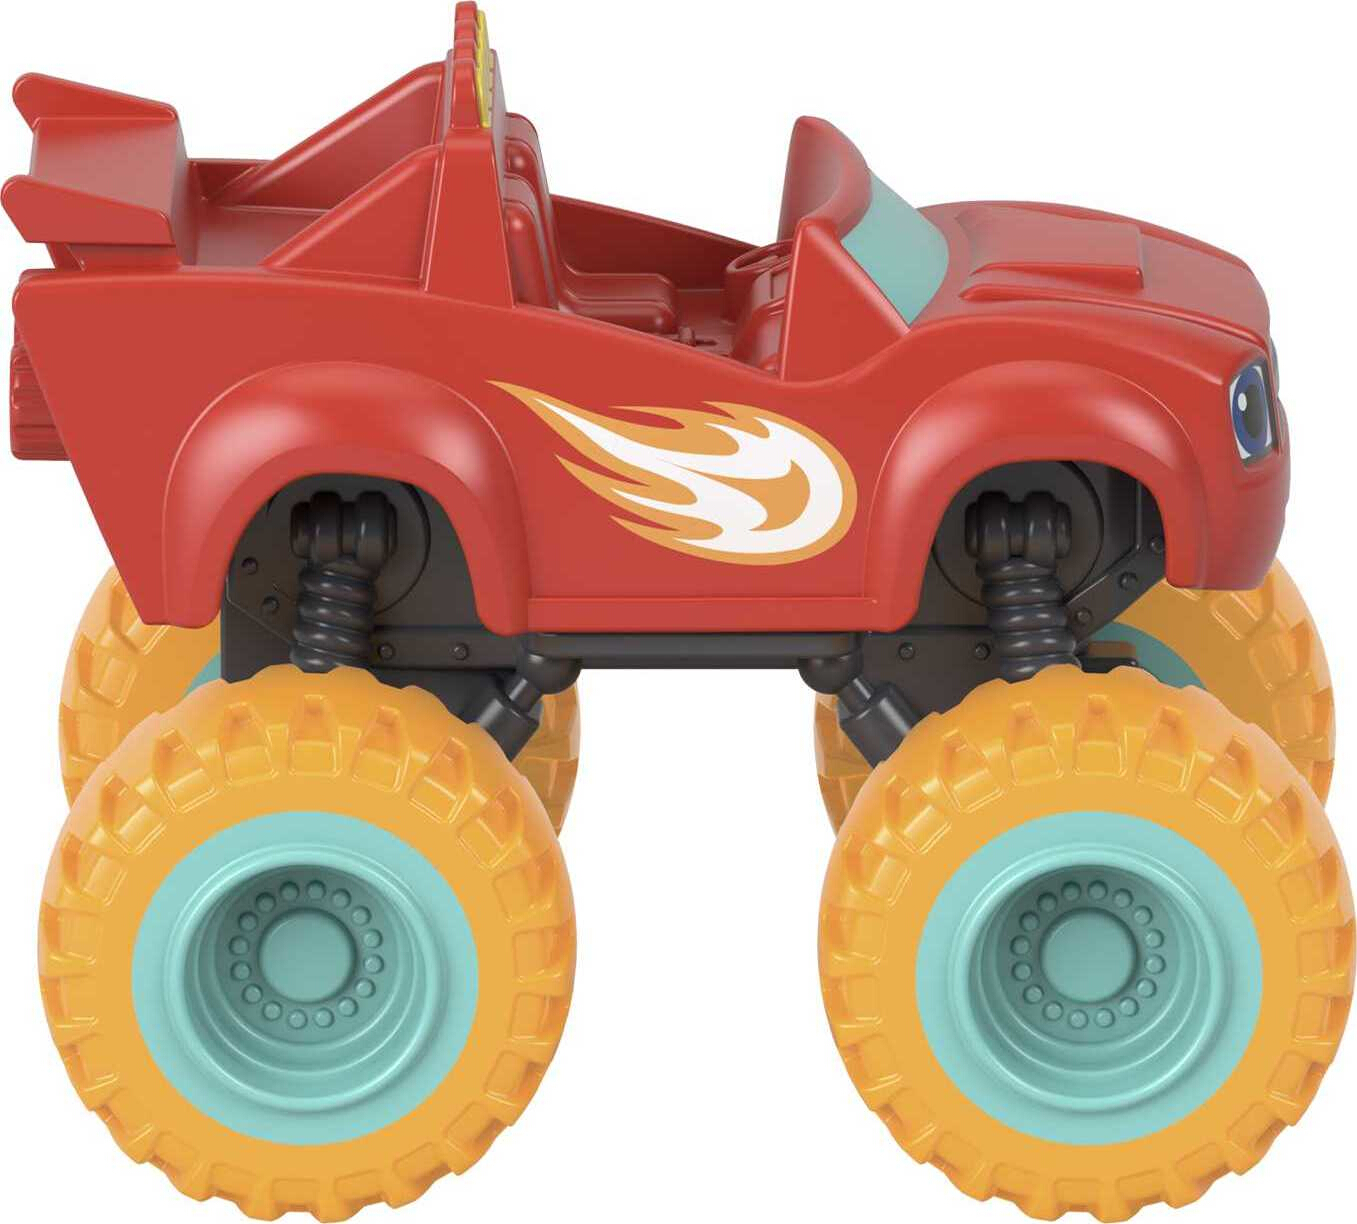 Fisher-Price Blaze and the Monster Machines Neon Wheels 5-Pack of Diecast Toy Trucks - image 4 of 6